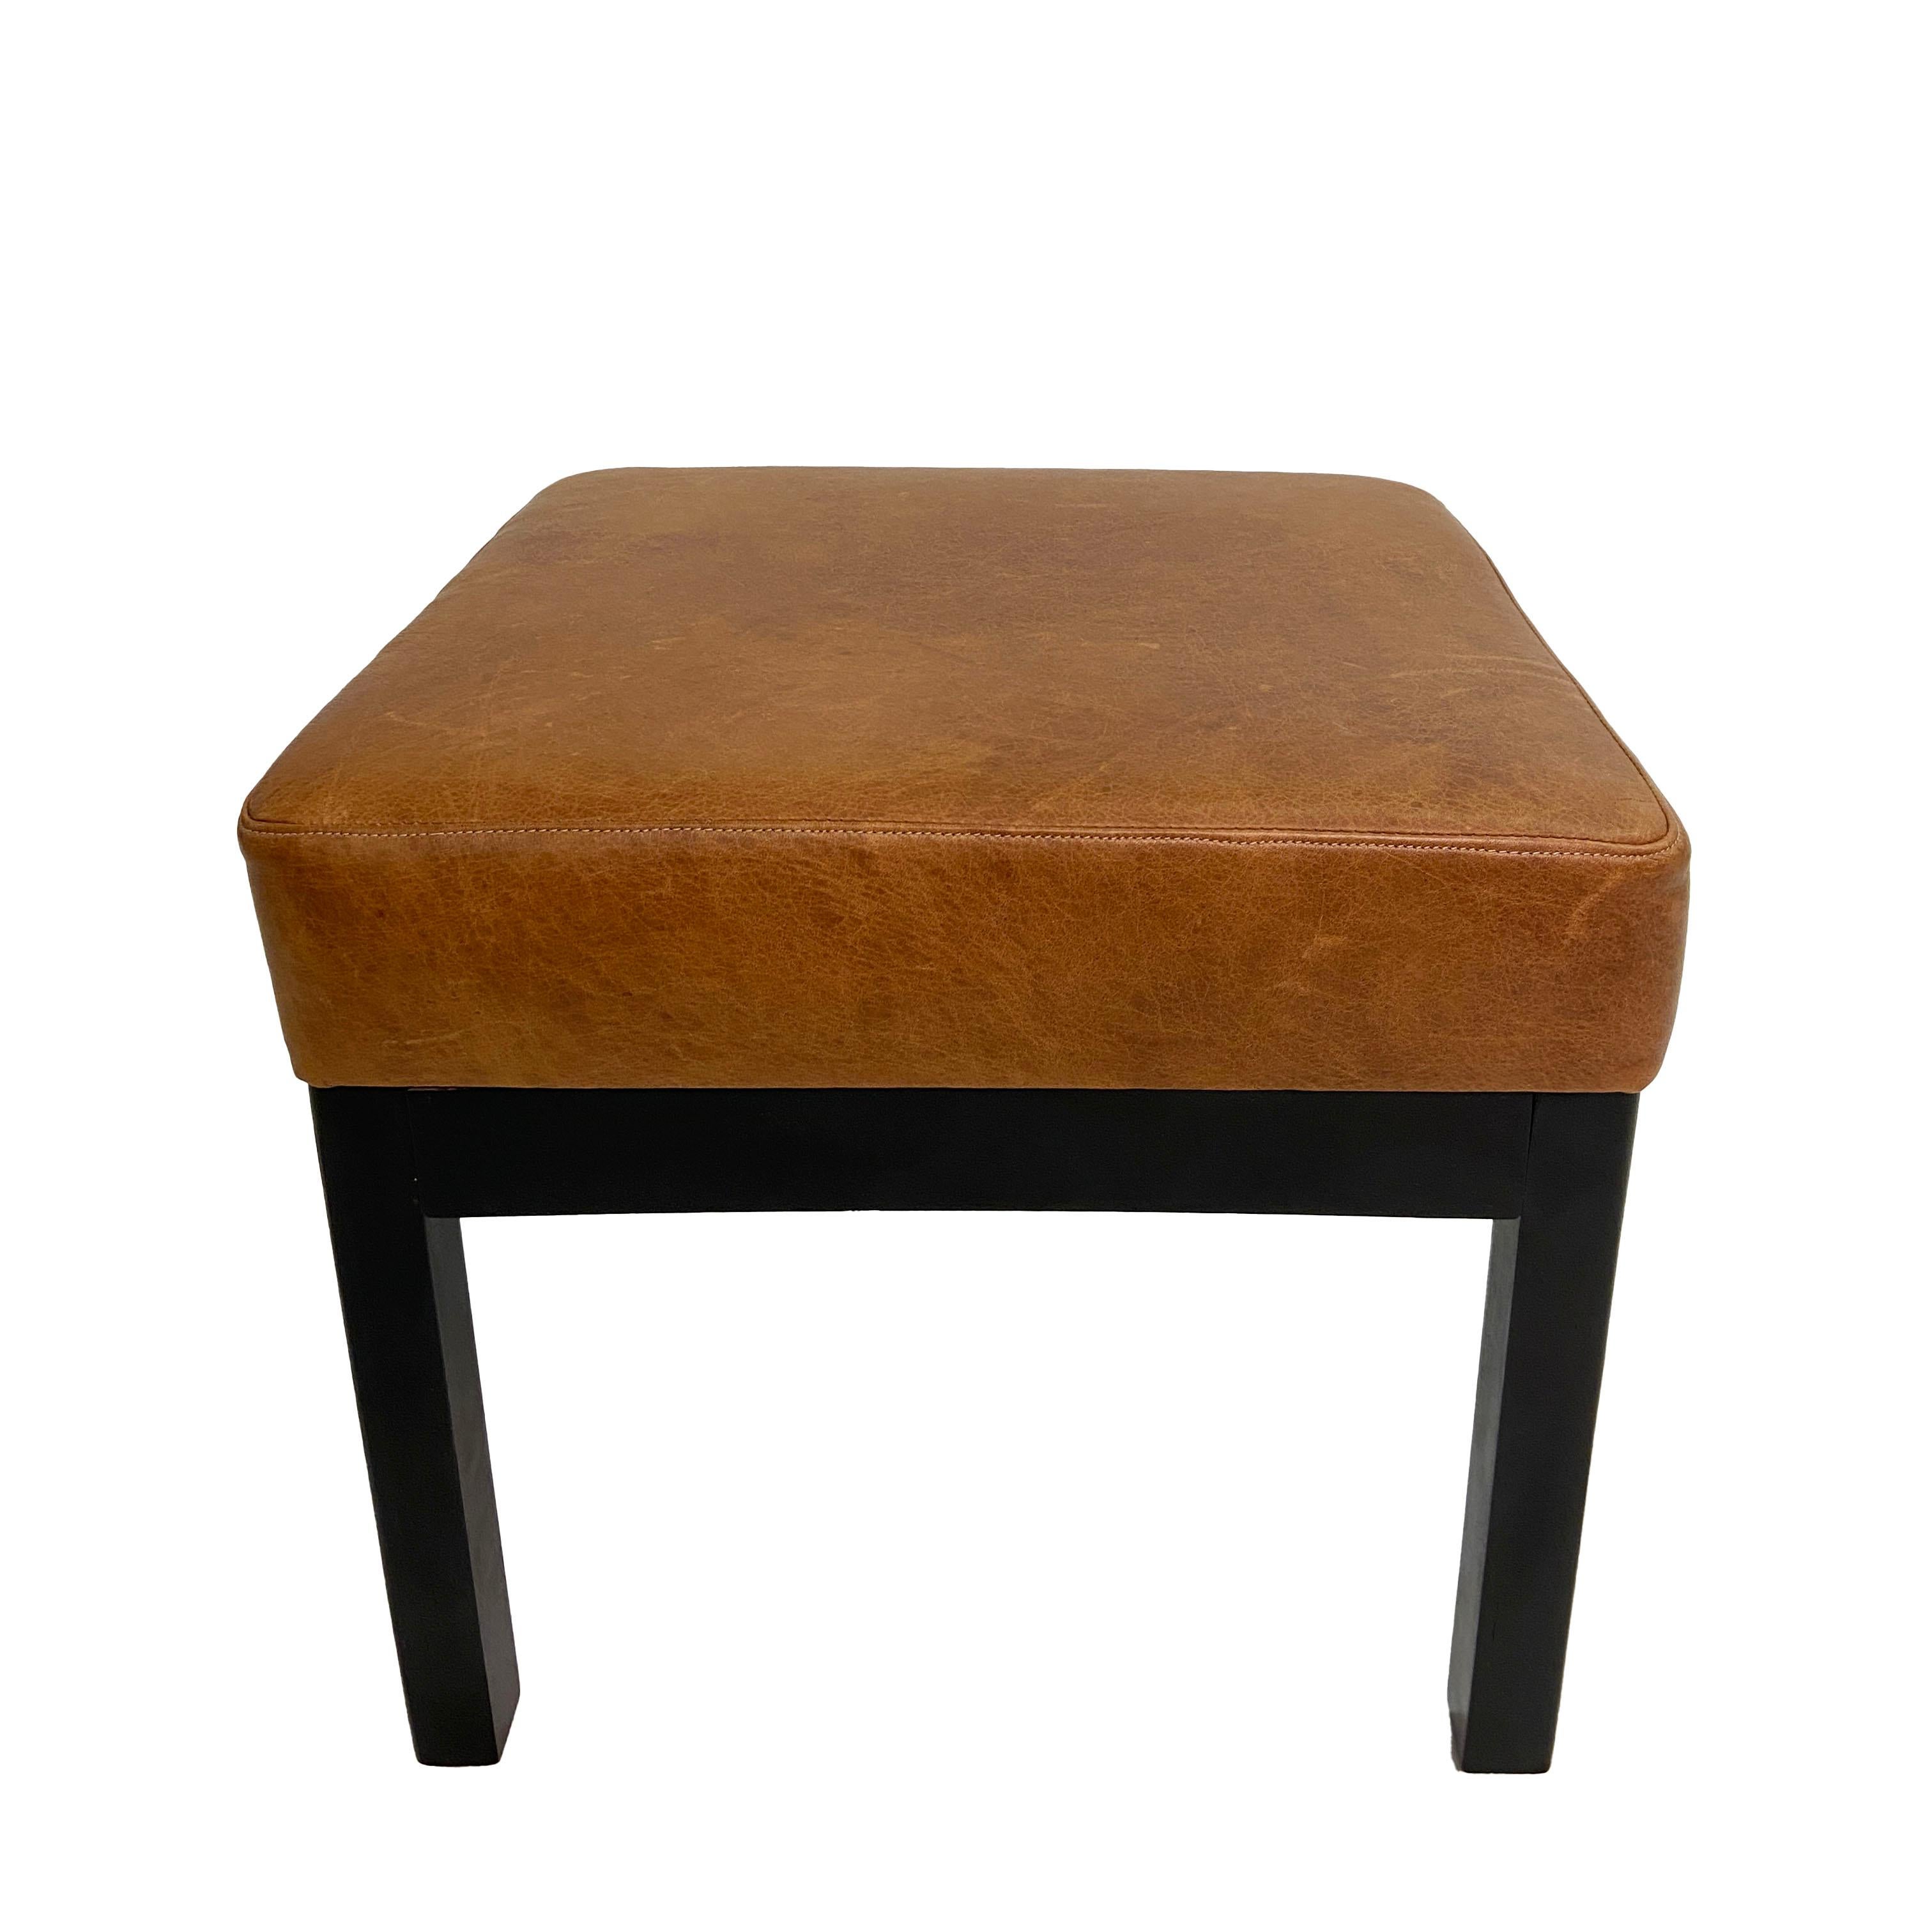 A pair of classic square low stools with cushions upholstered in handsome and mildly distressed brown leather. The solid wooden frames have been refinished in ebony. These modifications have been newly done and in excellent condition. Tuck them